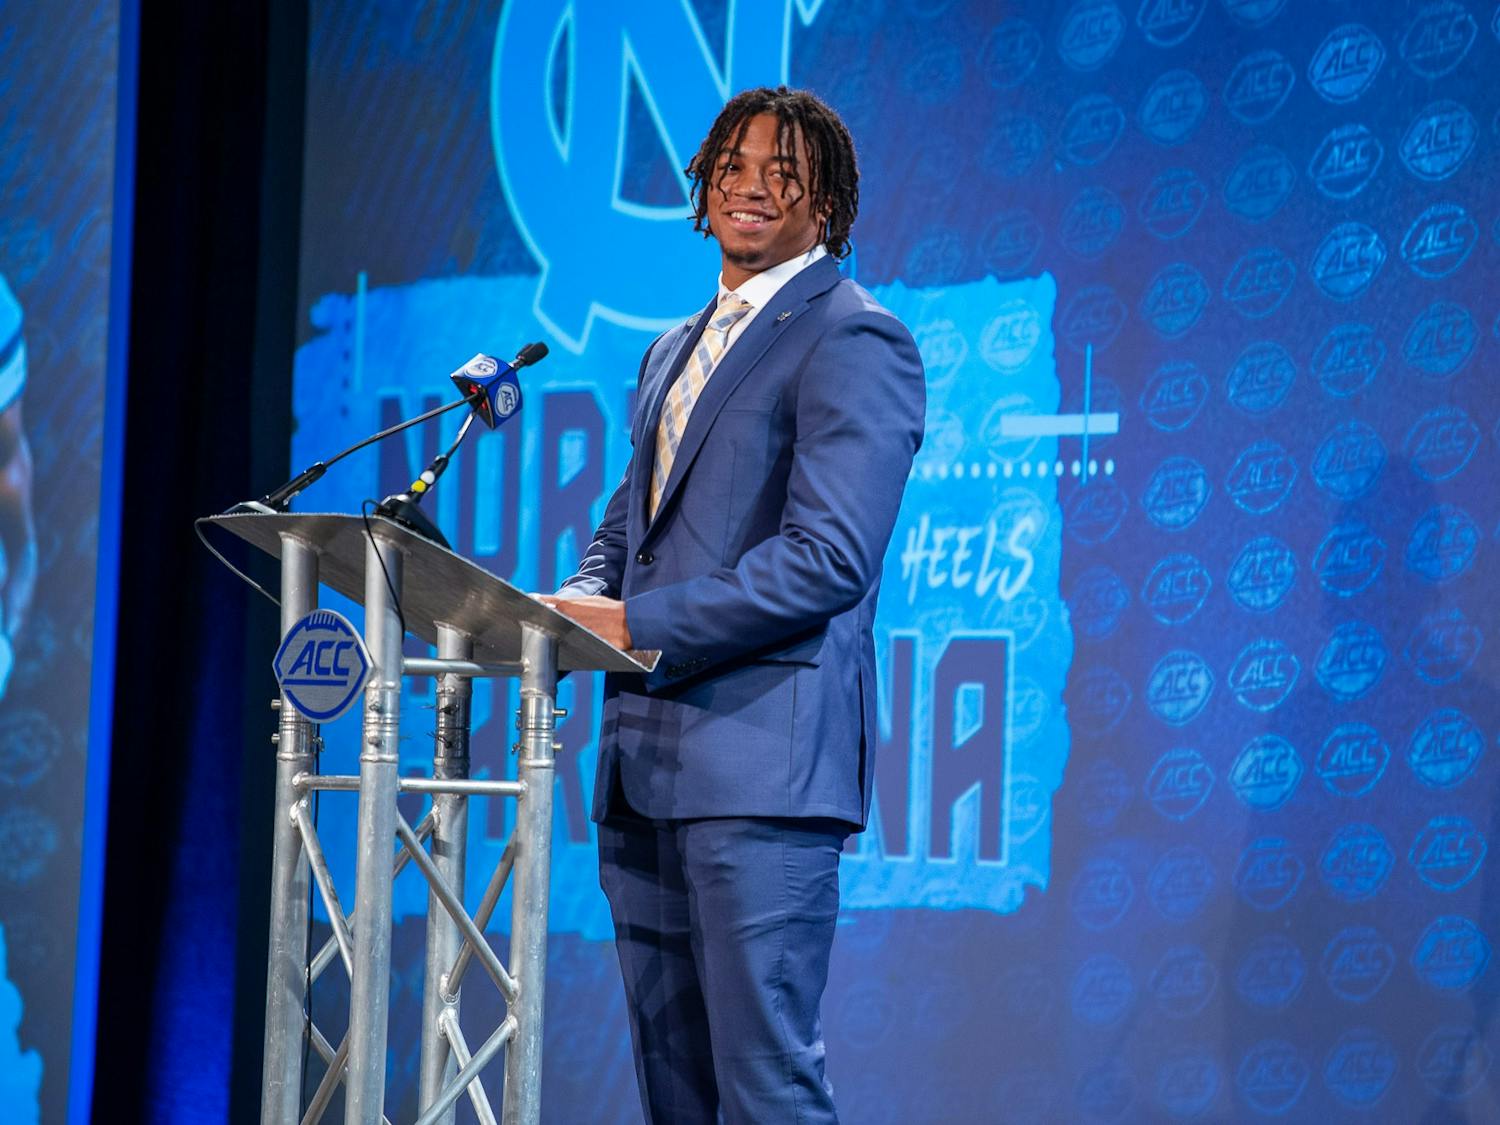 Cedric Gray, Linebacker, speaks during the ACC Kickoff Press Conference in The Westin Charlotte in Charlotte, NC on Thursday, July 21, 2022. 